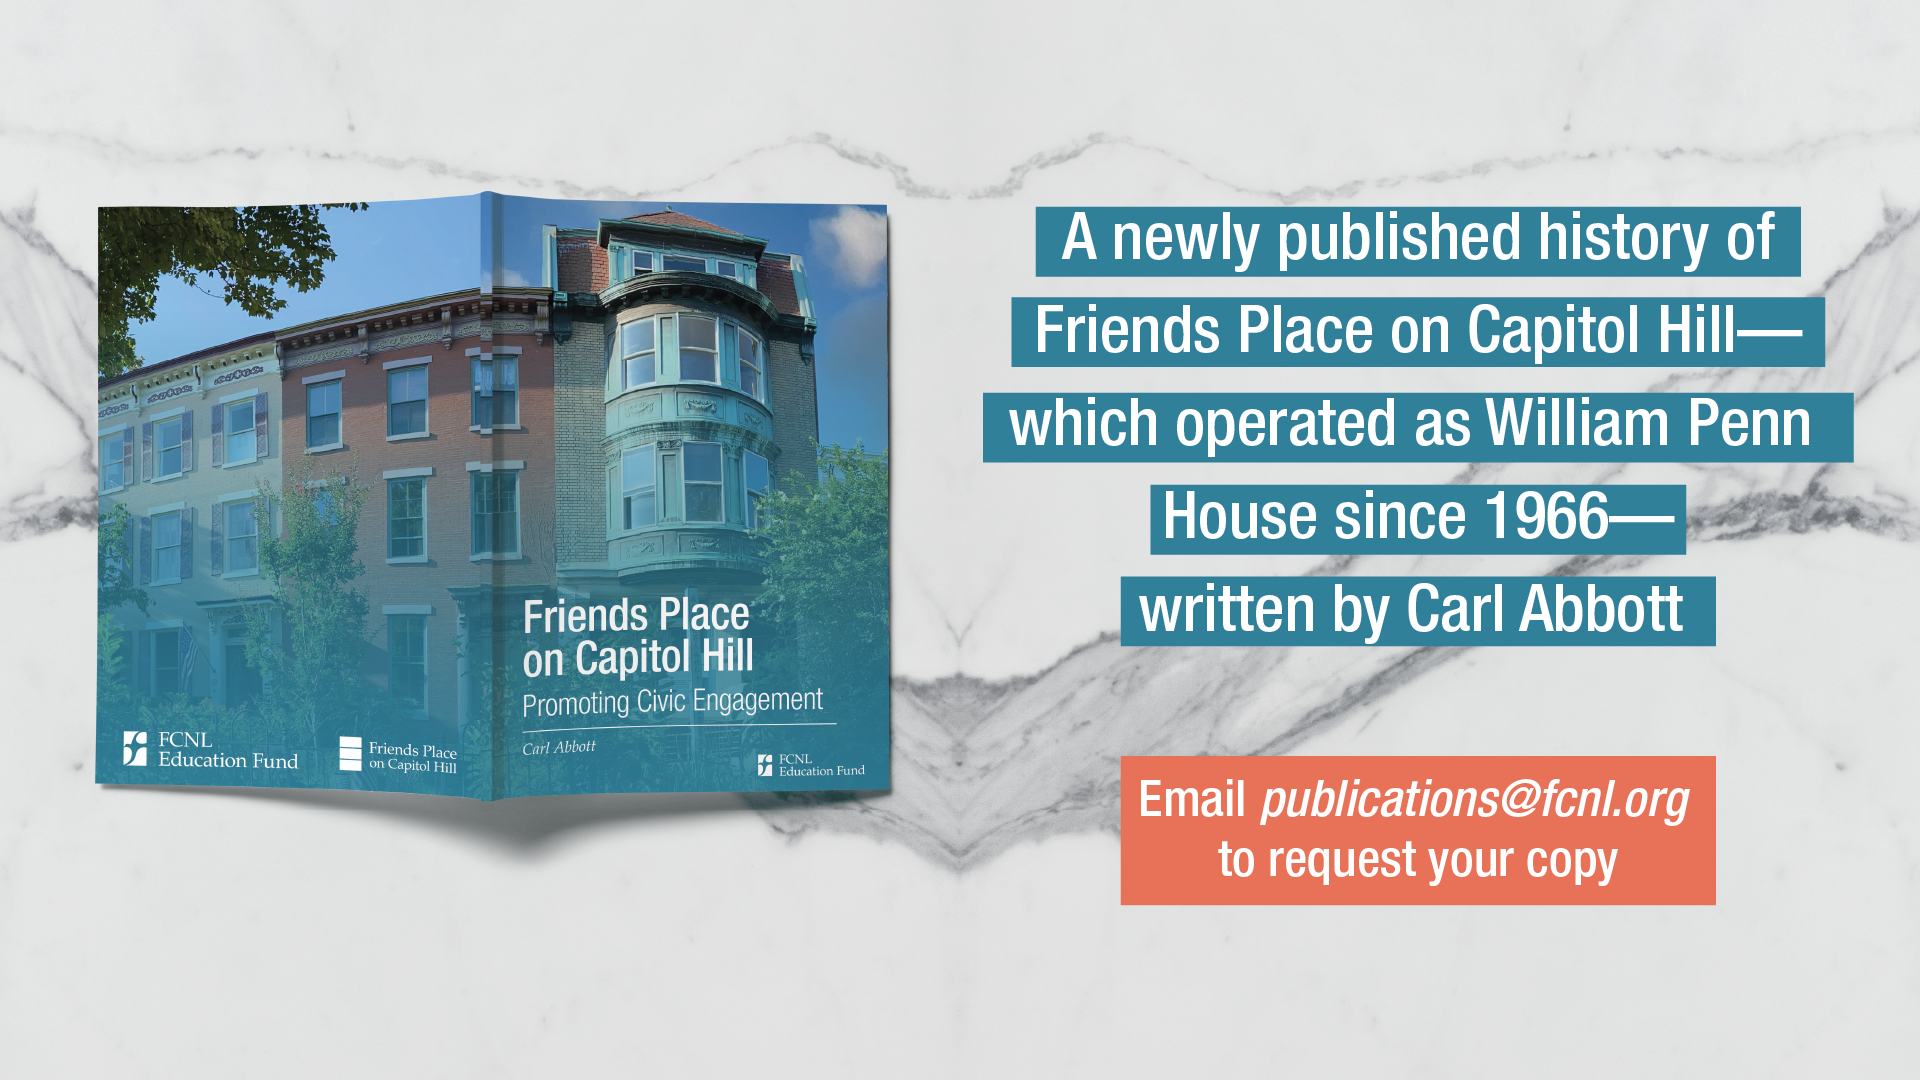 A newly published history of Freinds Place on Capitol Hill written by Carl Abbott. Email publications@fcnl.org to request a copy.